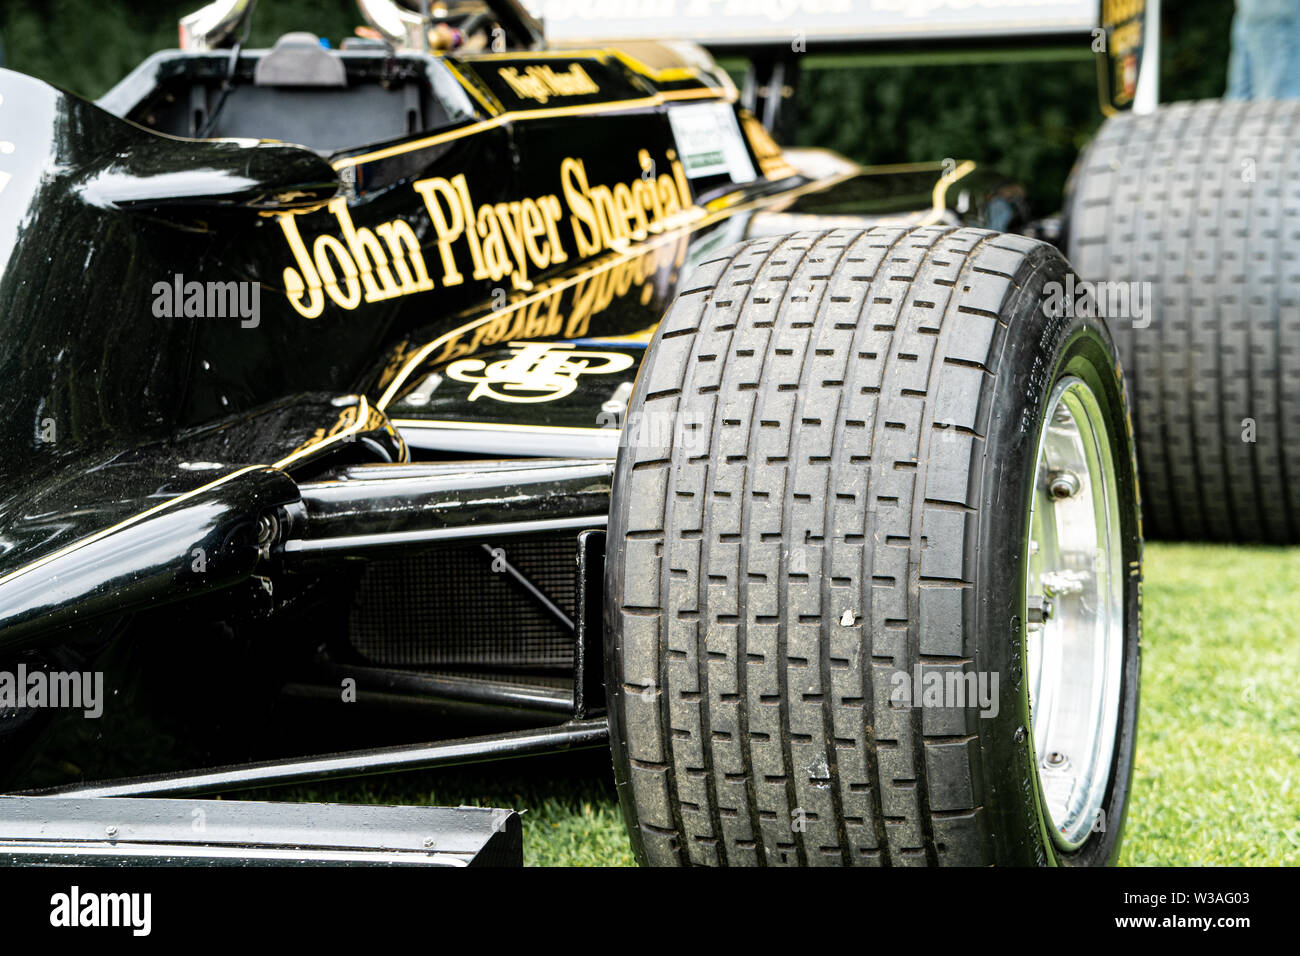 Nigel Mansell F1 Lotus 92 voitures classiques à l'Oakamoor Hill Climb, 13 juillet 2019, Oakamoor, Staffordshire, Royaume-Uni Banque D'Images